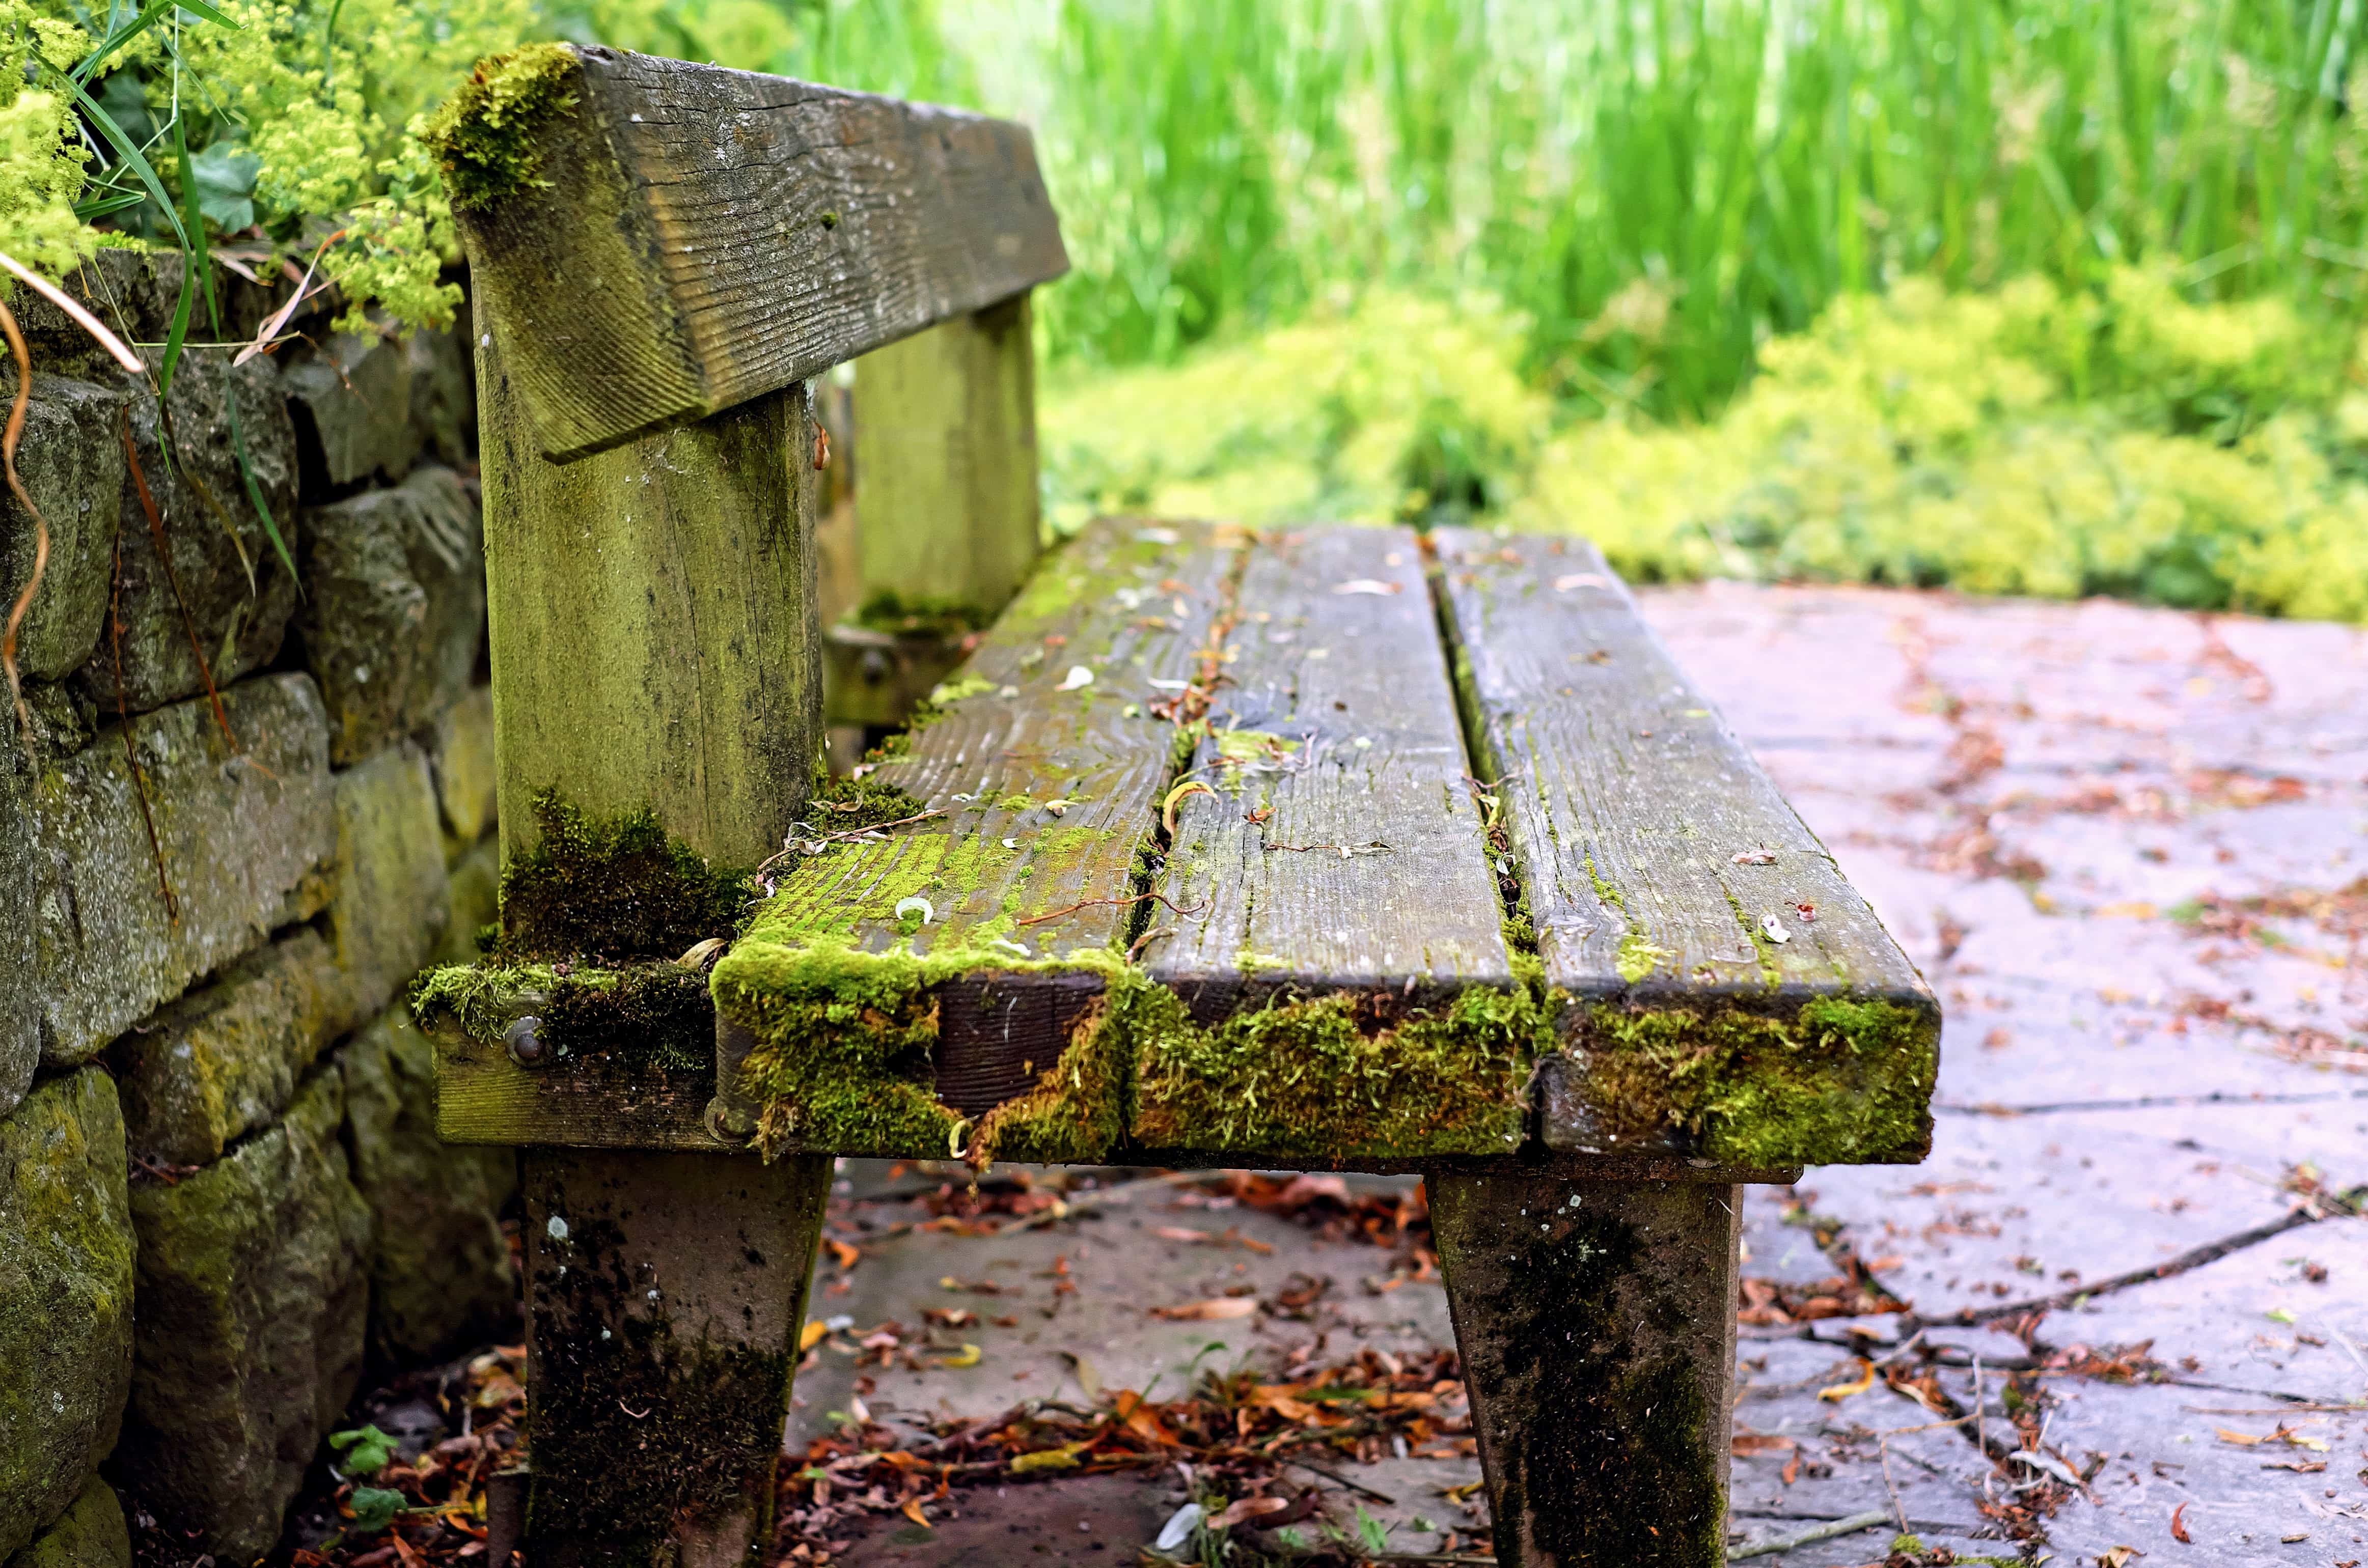 Free picture: stone, nature, wood, bench, outdoor, tree, grass, object